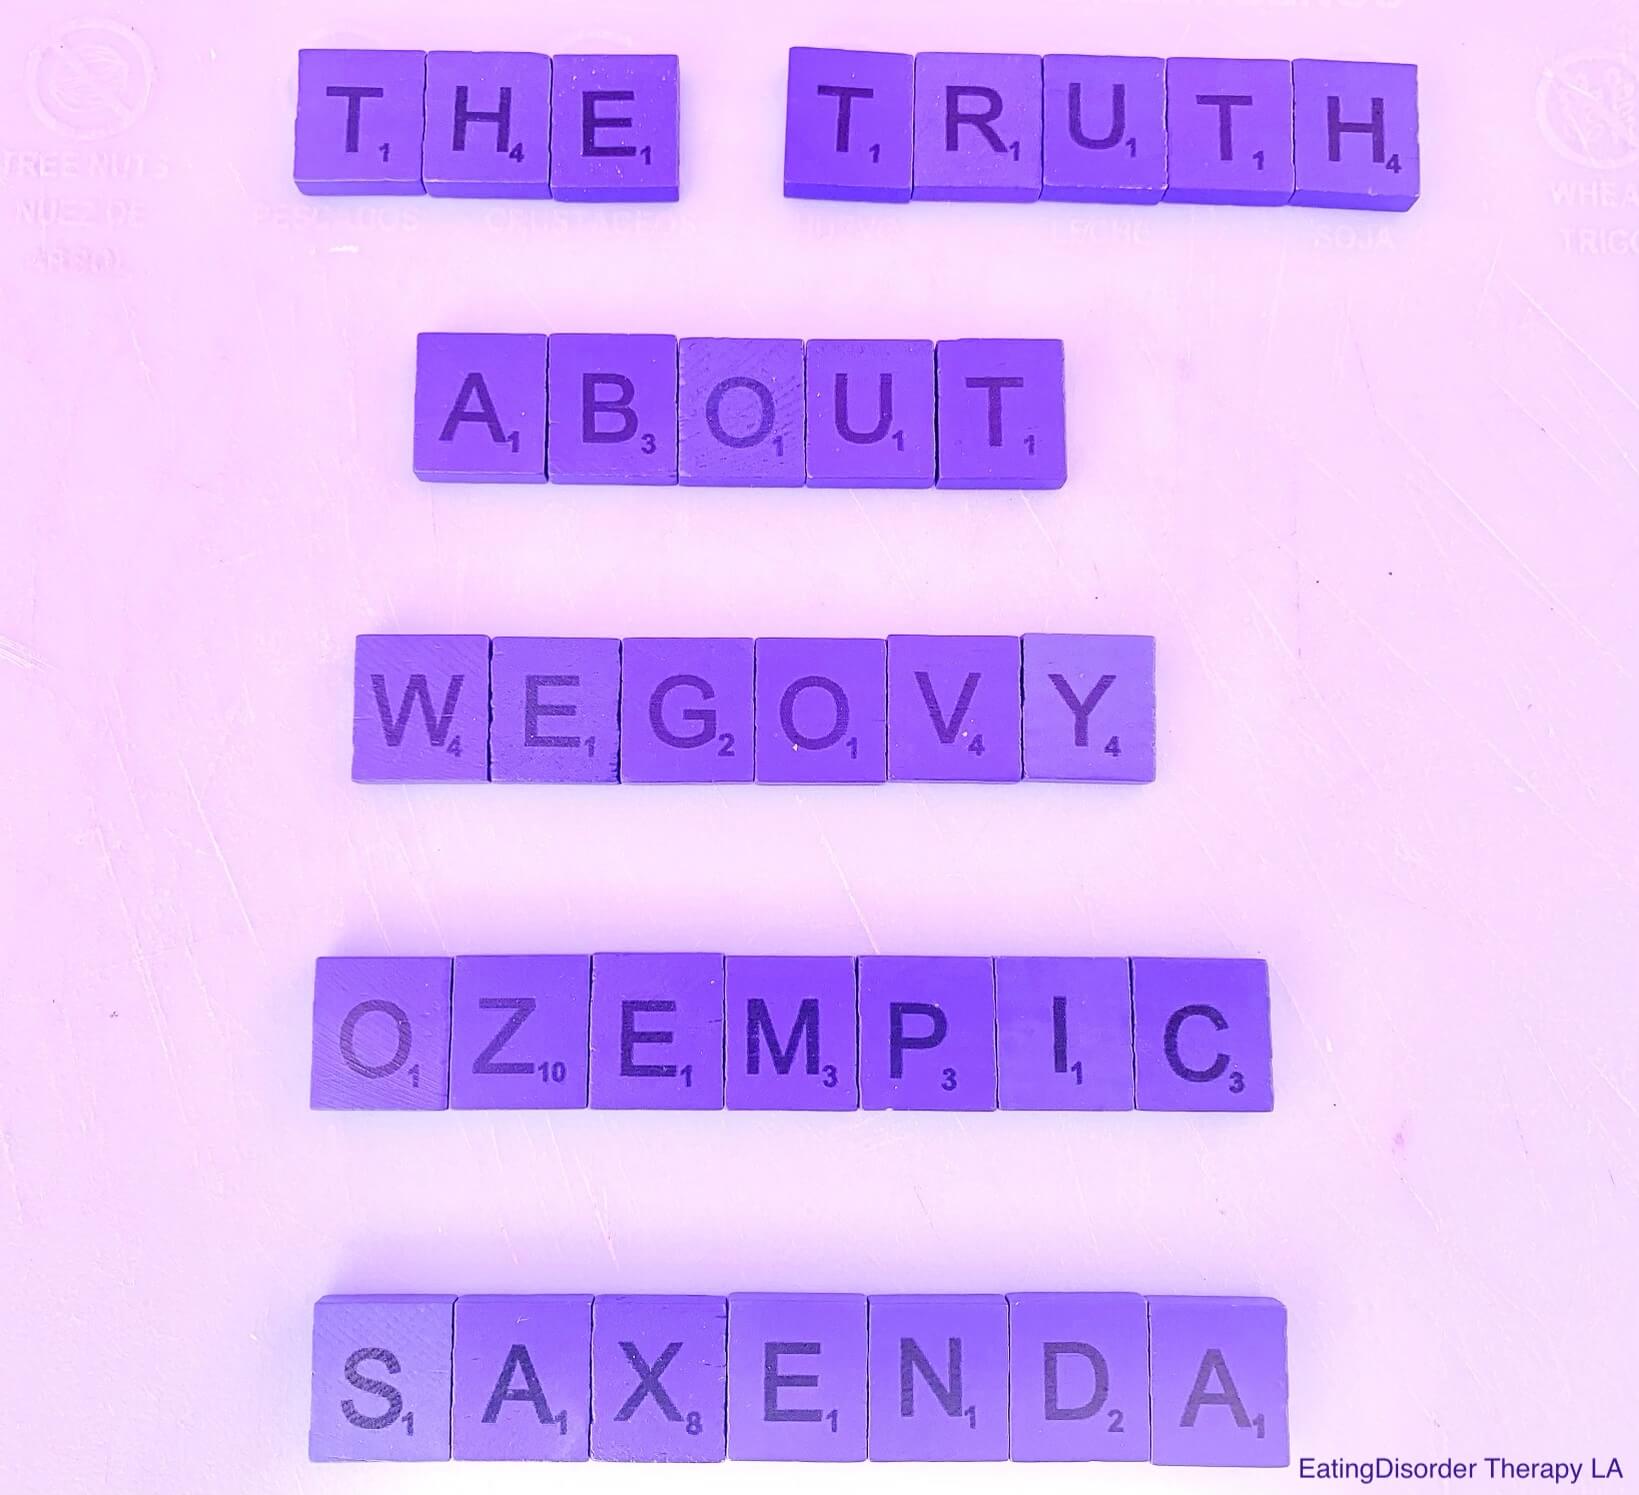 Five Things You Should Know Before Jumping on the Ozempic Bandwagon [Image description: purple scrabble tiles spelling "The truth about Wegovy Ozempic Saxenda"]